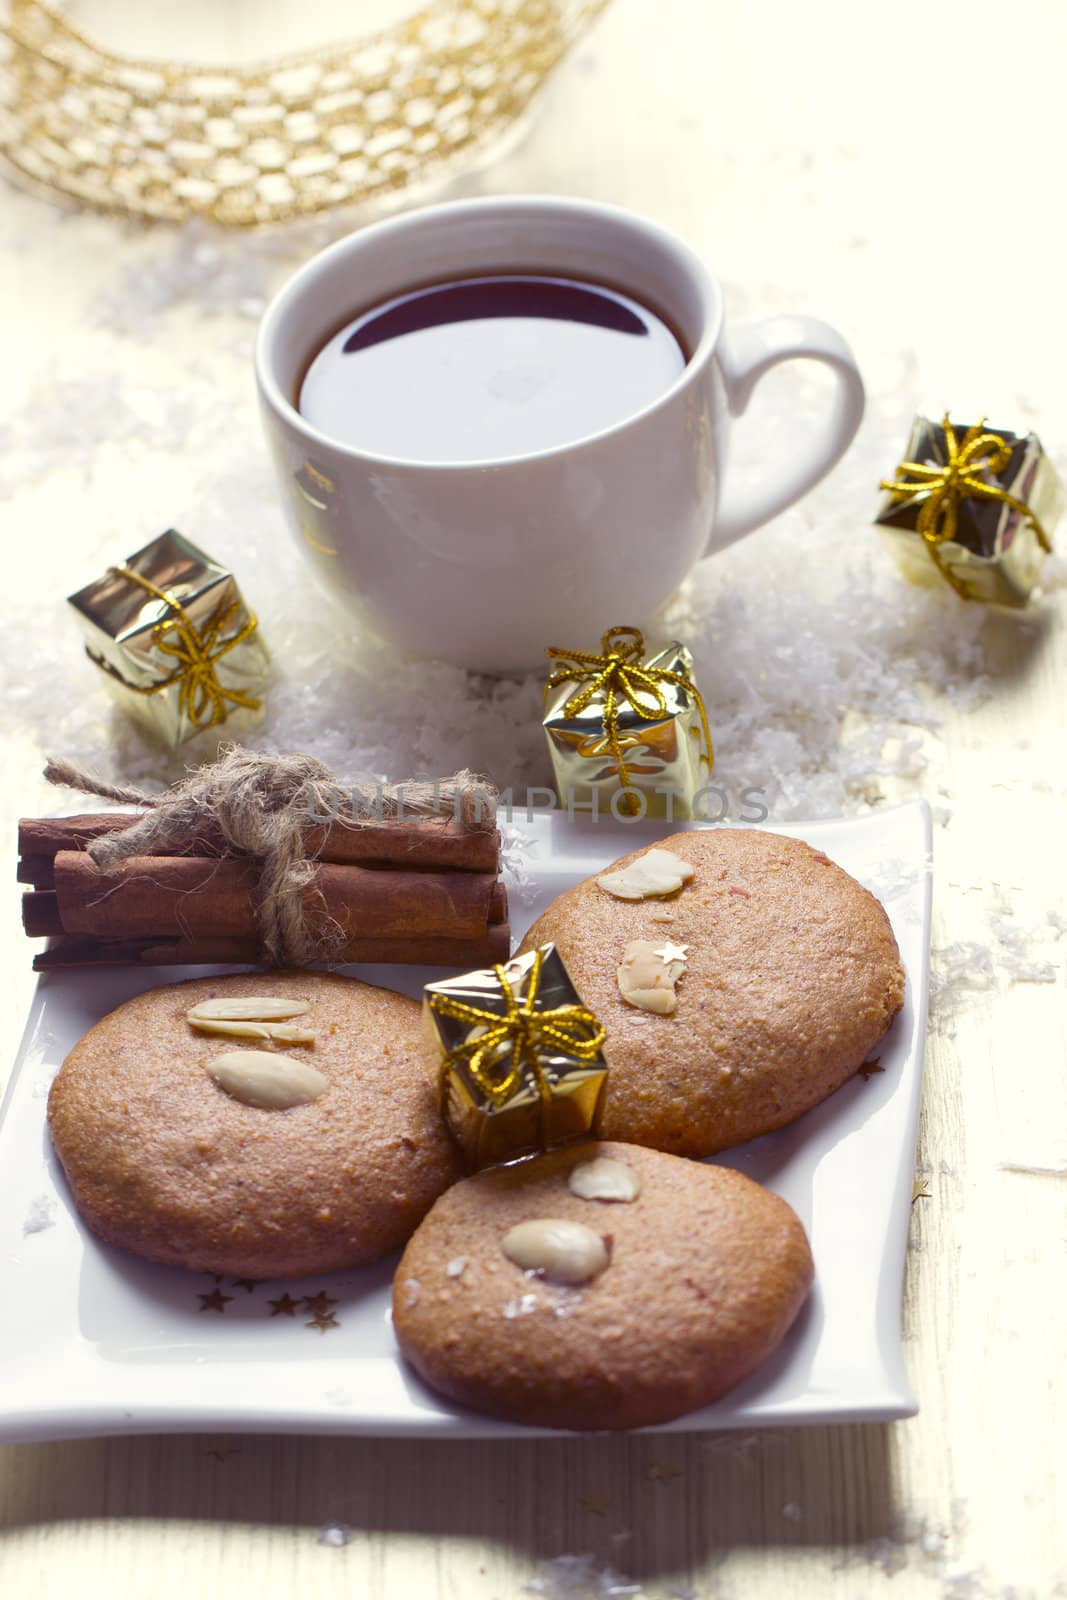 Cookies with nuts and a cup of tea on a background of Christmas gifts